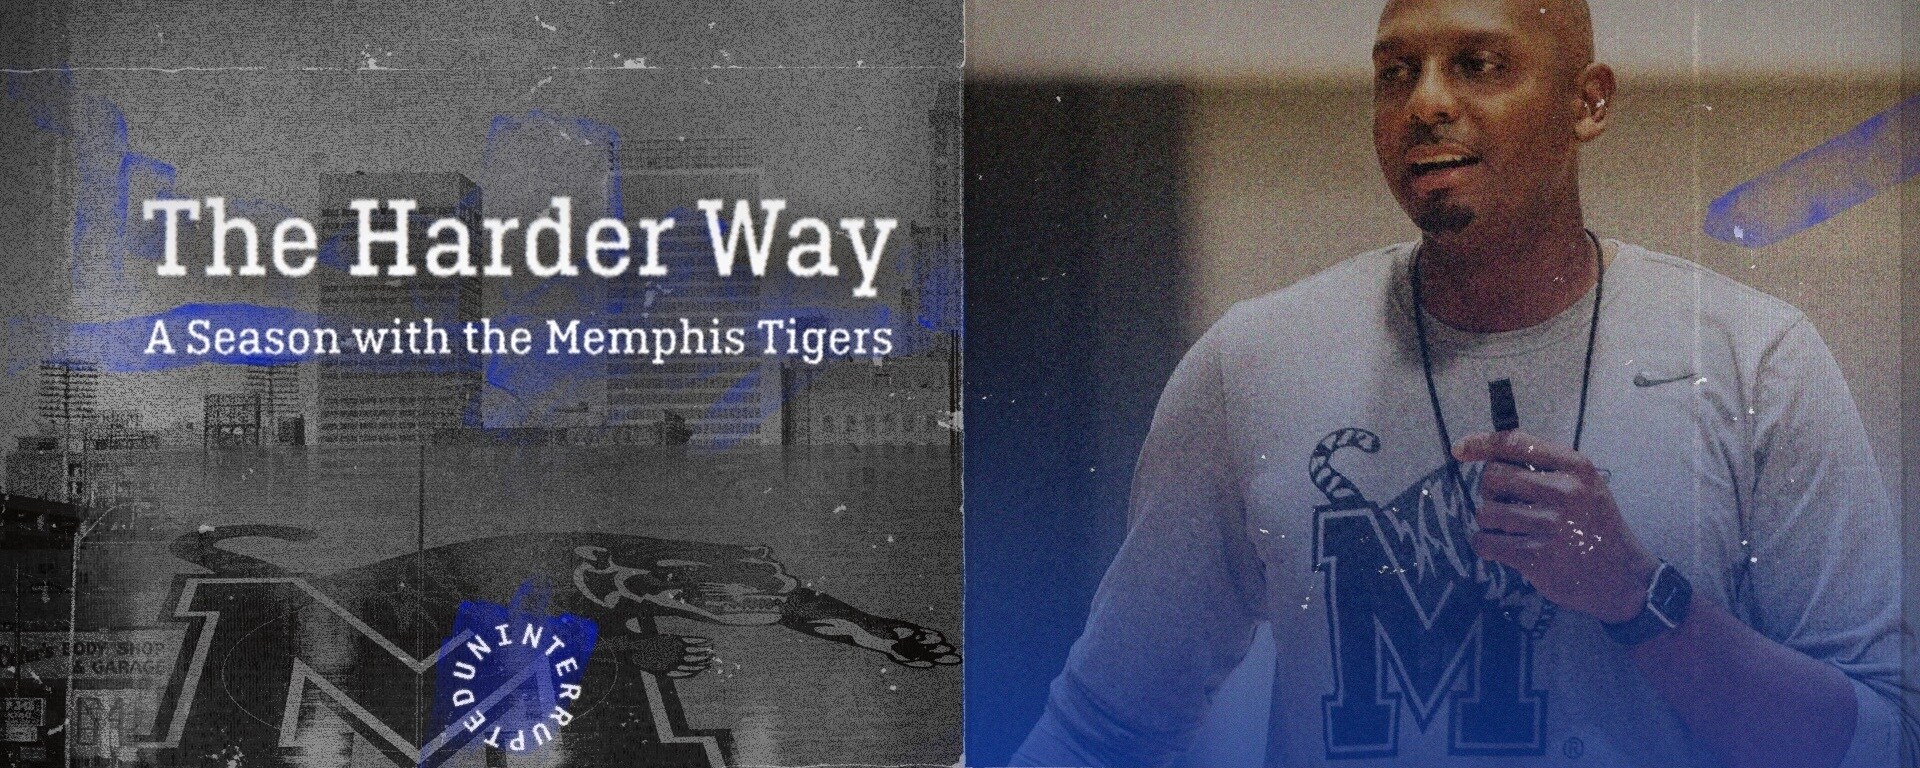 Exclusive Premiere from UNINTERRUPTED and ESPN+: The Harder Way Featuring Penny Hardaway and Memphis Men’s Basketball